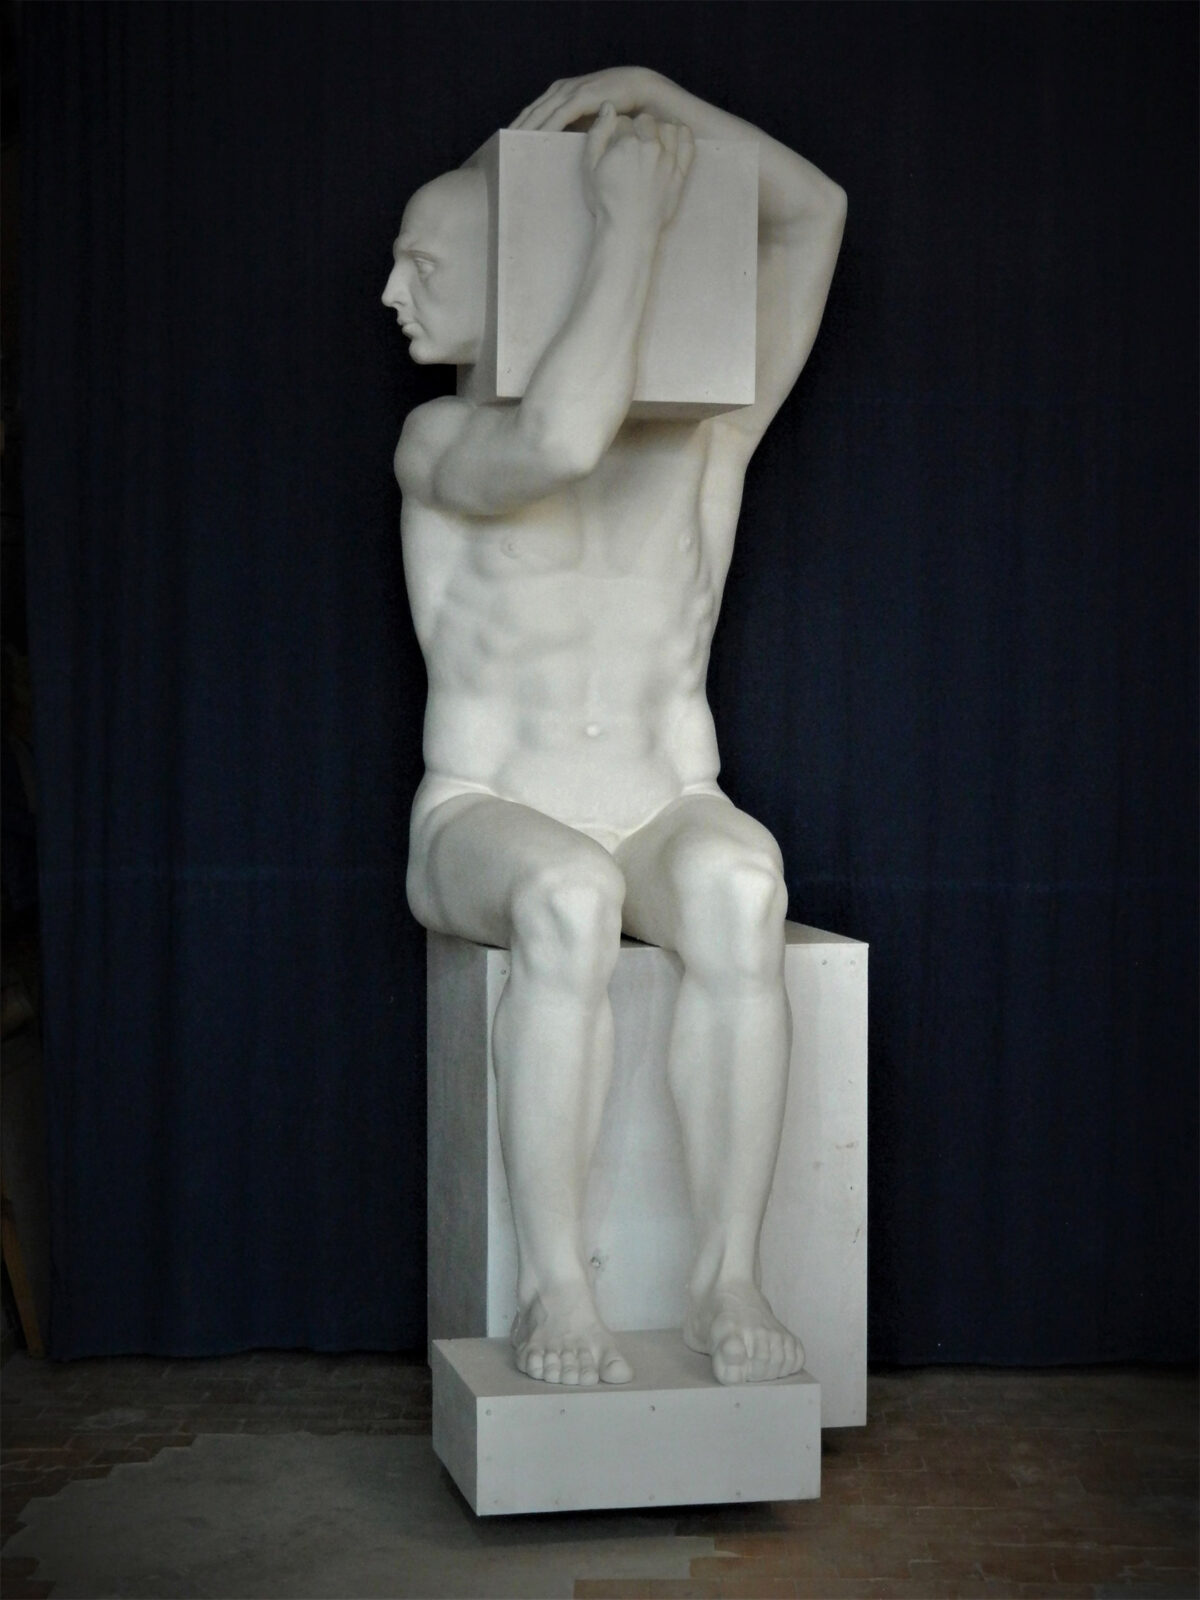 Formidable Granite And Marble Sculptures By Adrian Balogh (2)